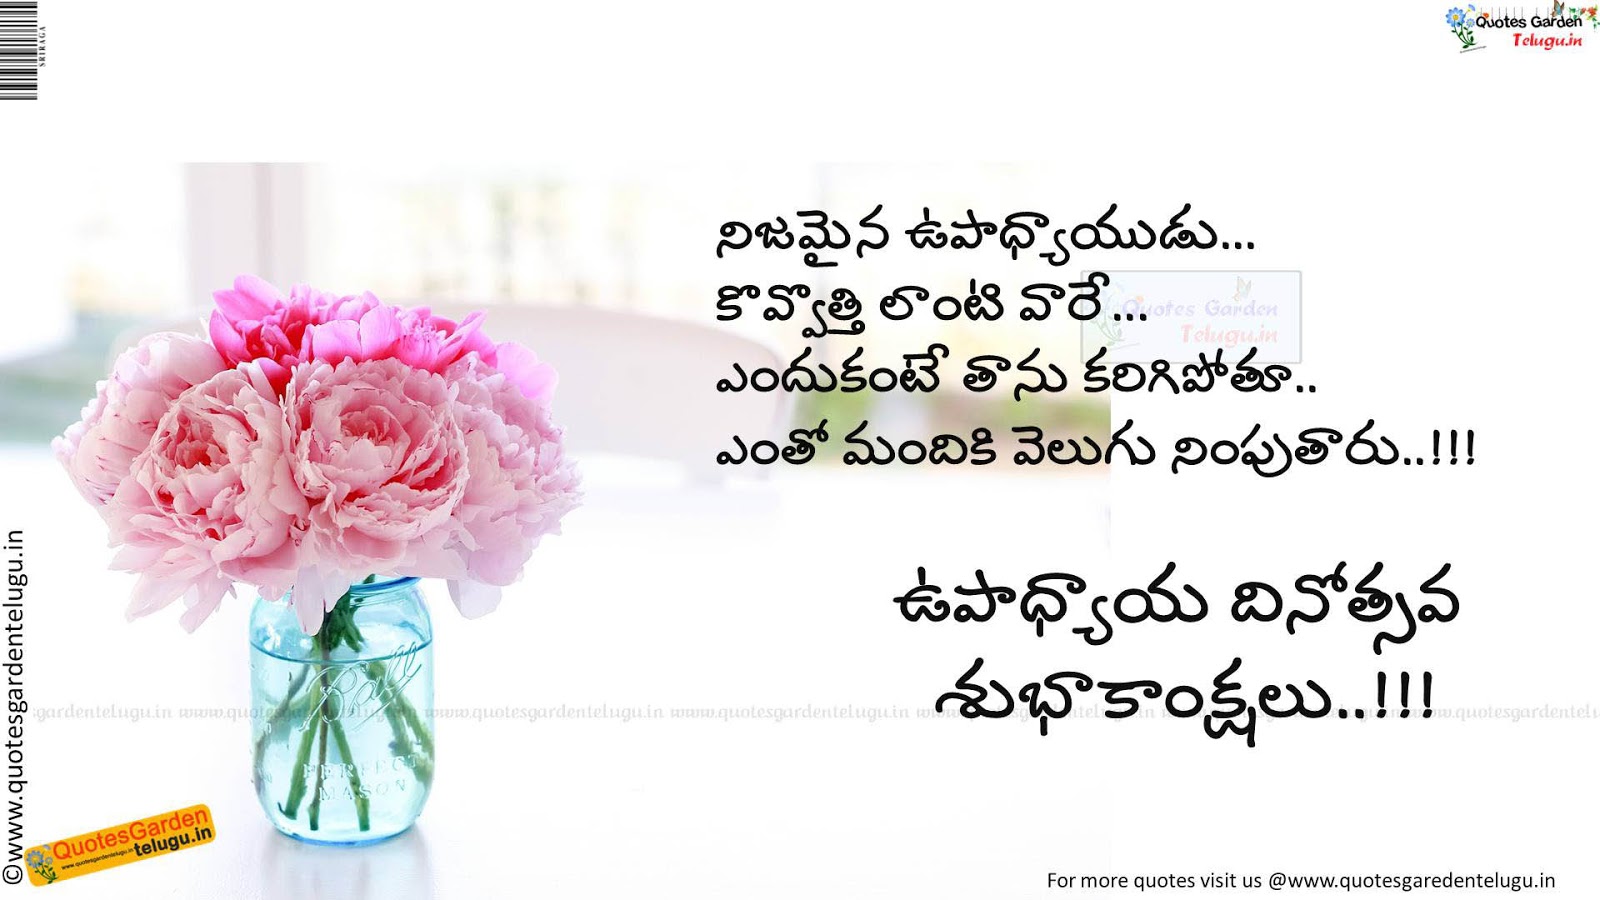 Teachers Day Quotes In Telugu - HD Wallpaper 